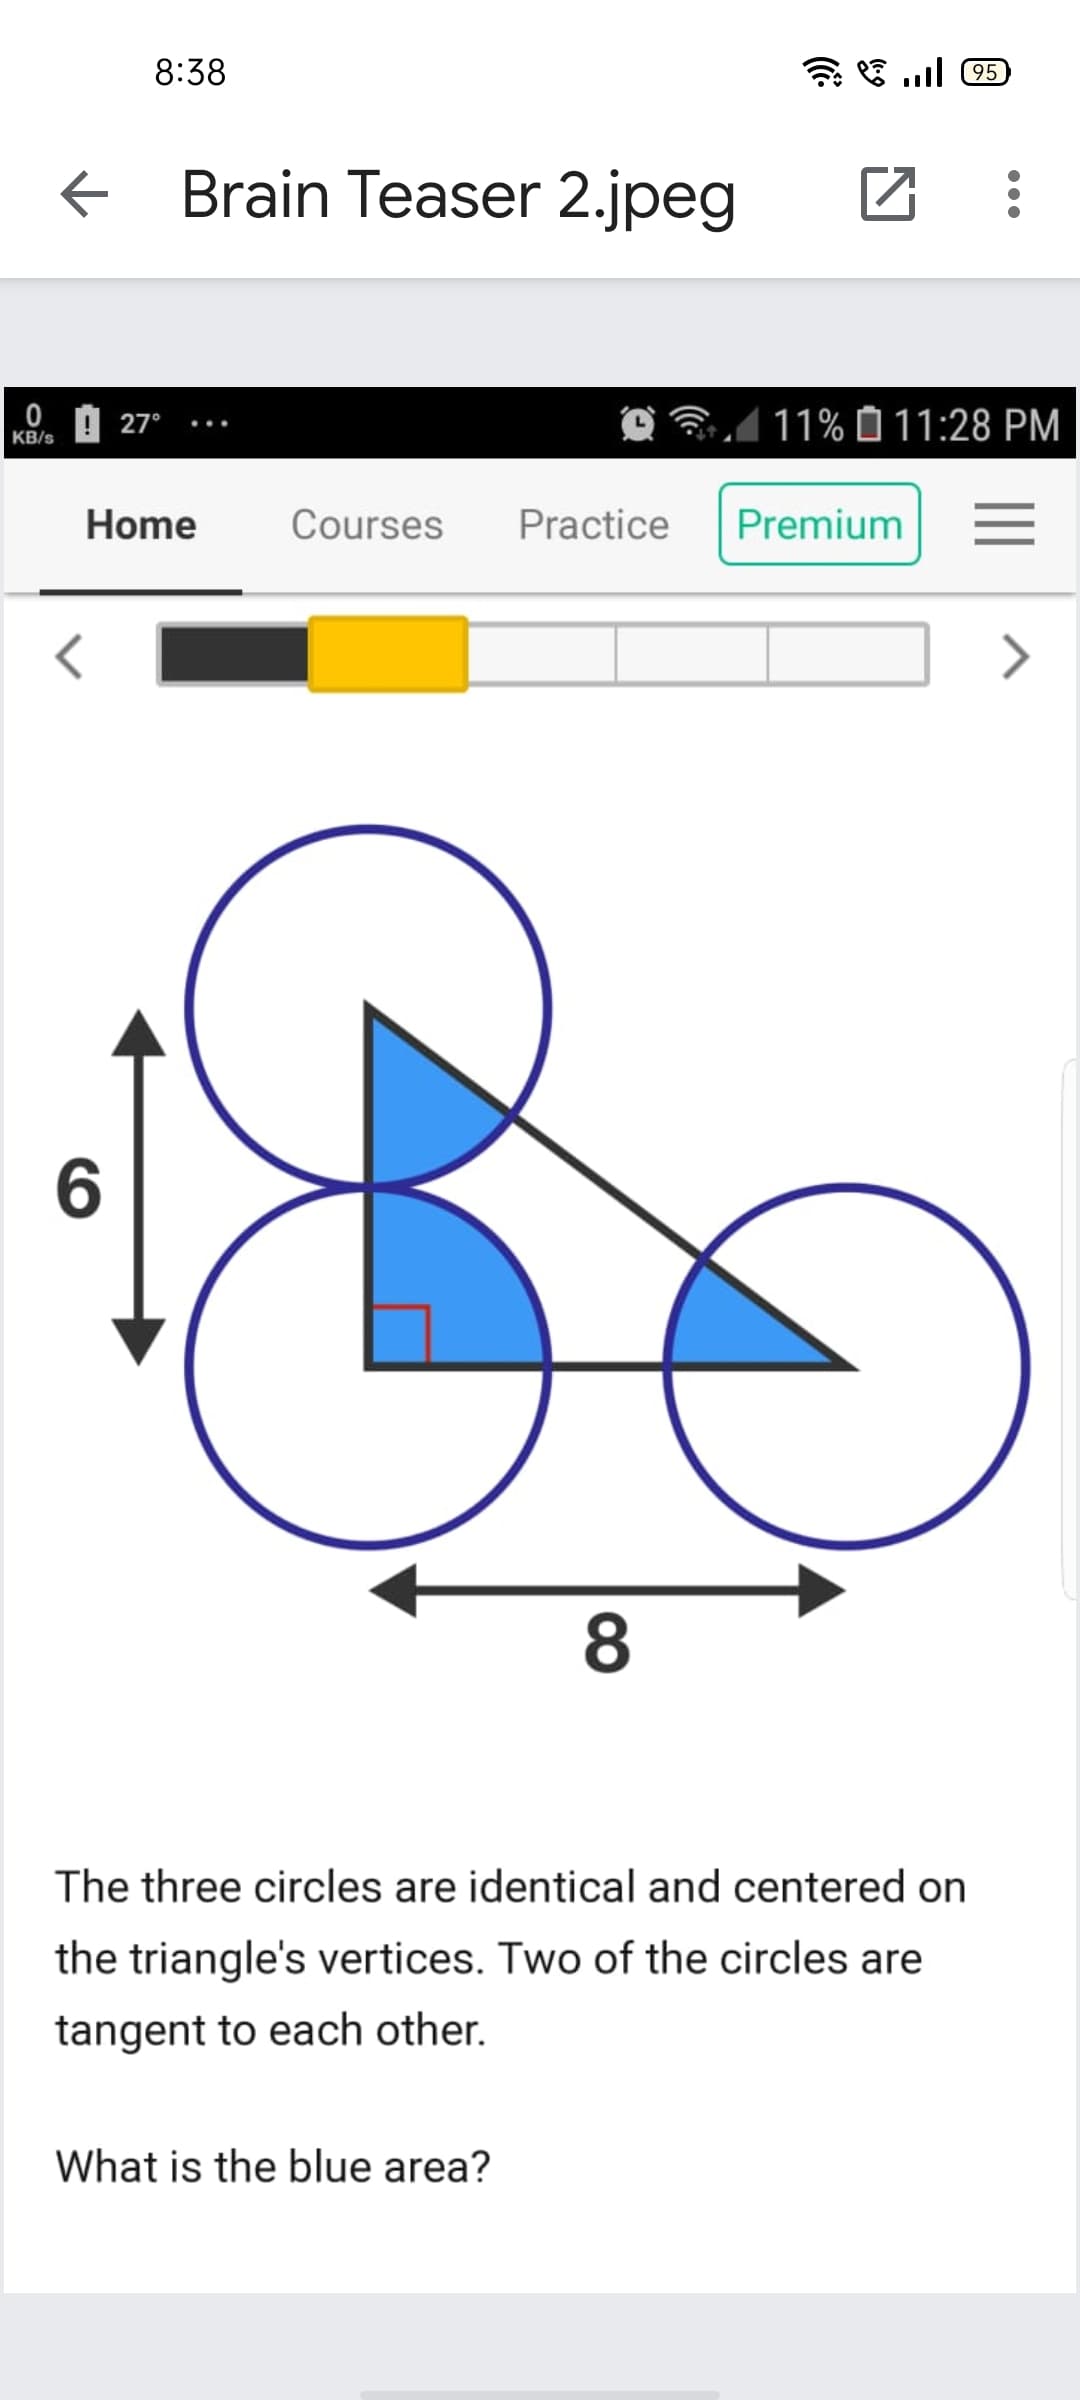 8:38
Brain Teaser 2.jpeg
0 A 27°
1 11% Ô 11:28 PM
...
KB/s
Home
Courses
Practice
Premium
6.
The three circles are identical and centered on
the triangle's vertices. Two of the circles are
tangent to each other.
What is the blue area?
